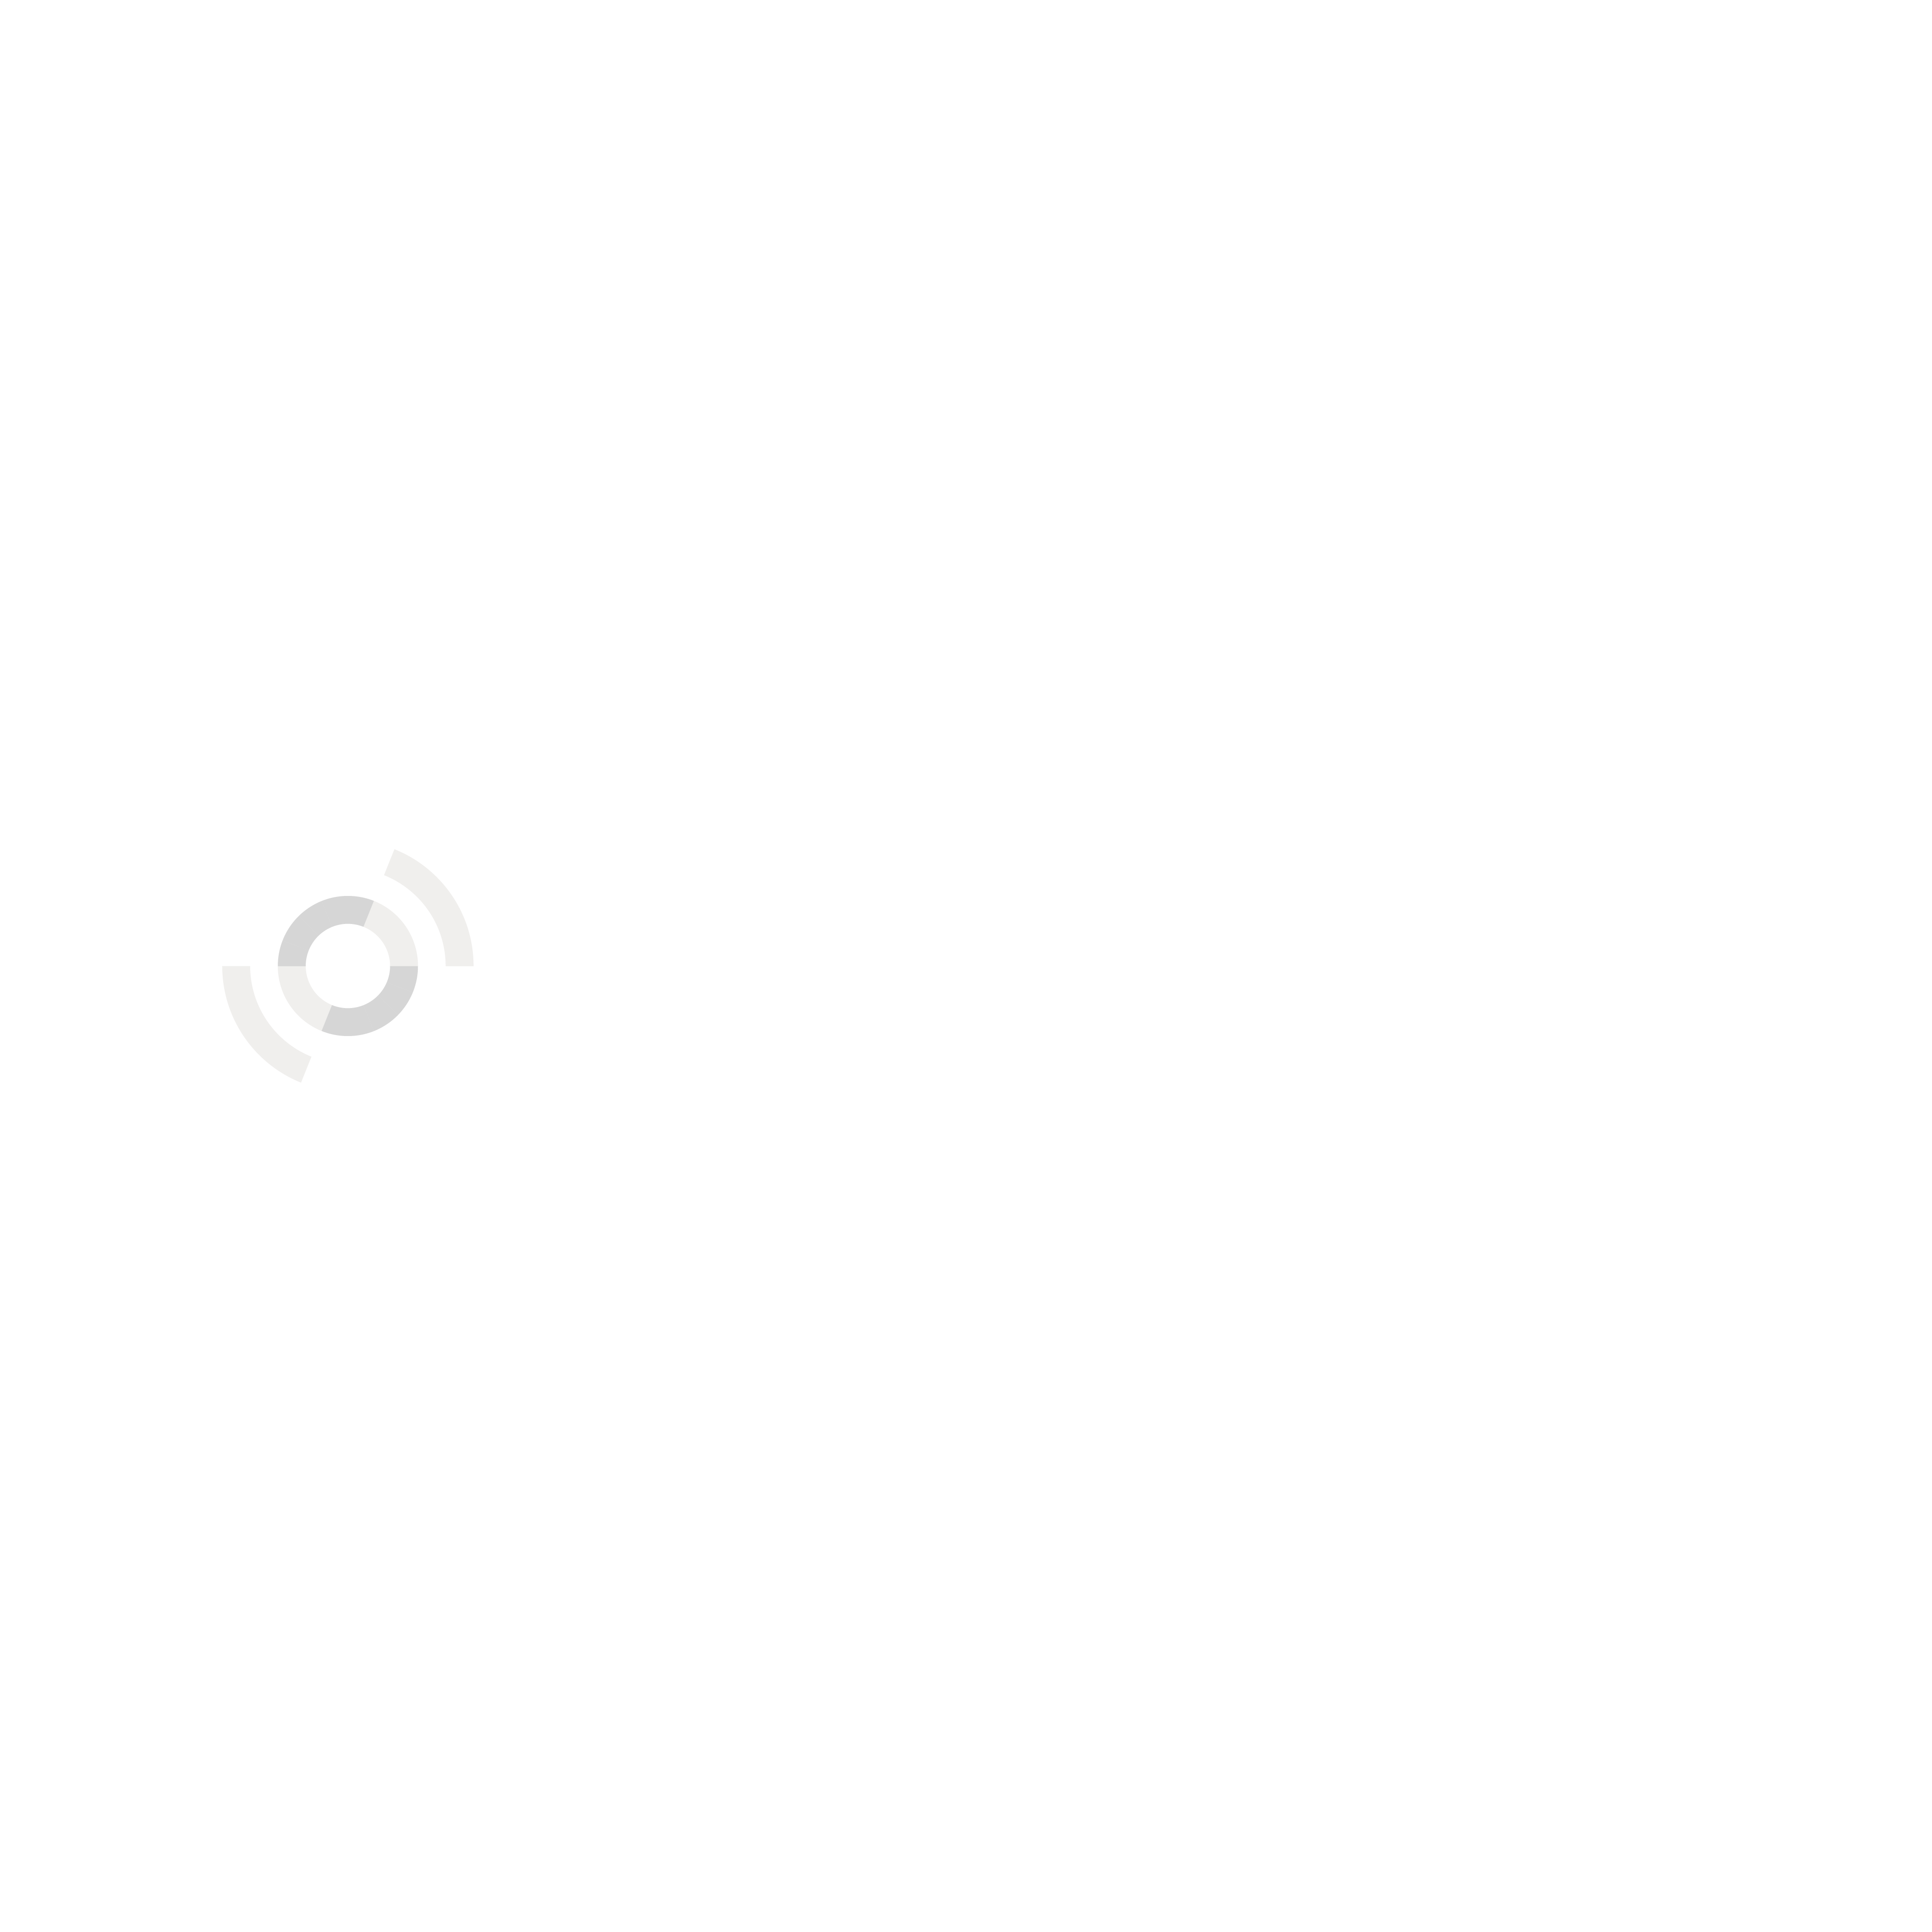 Finalease-group-security-photo-groupe-logotype-lease-protect-france-blanc